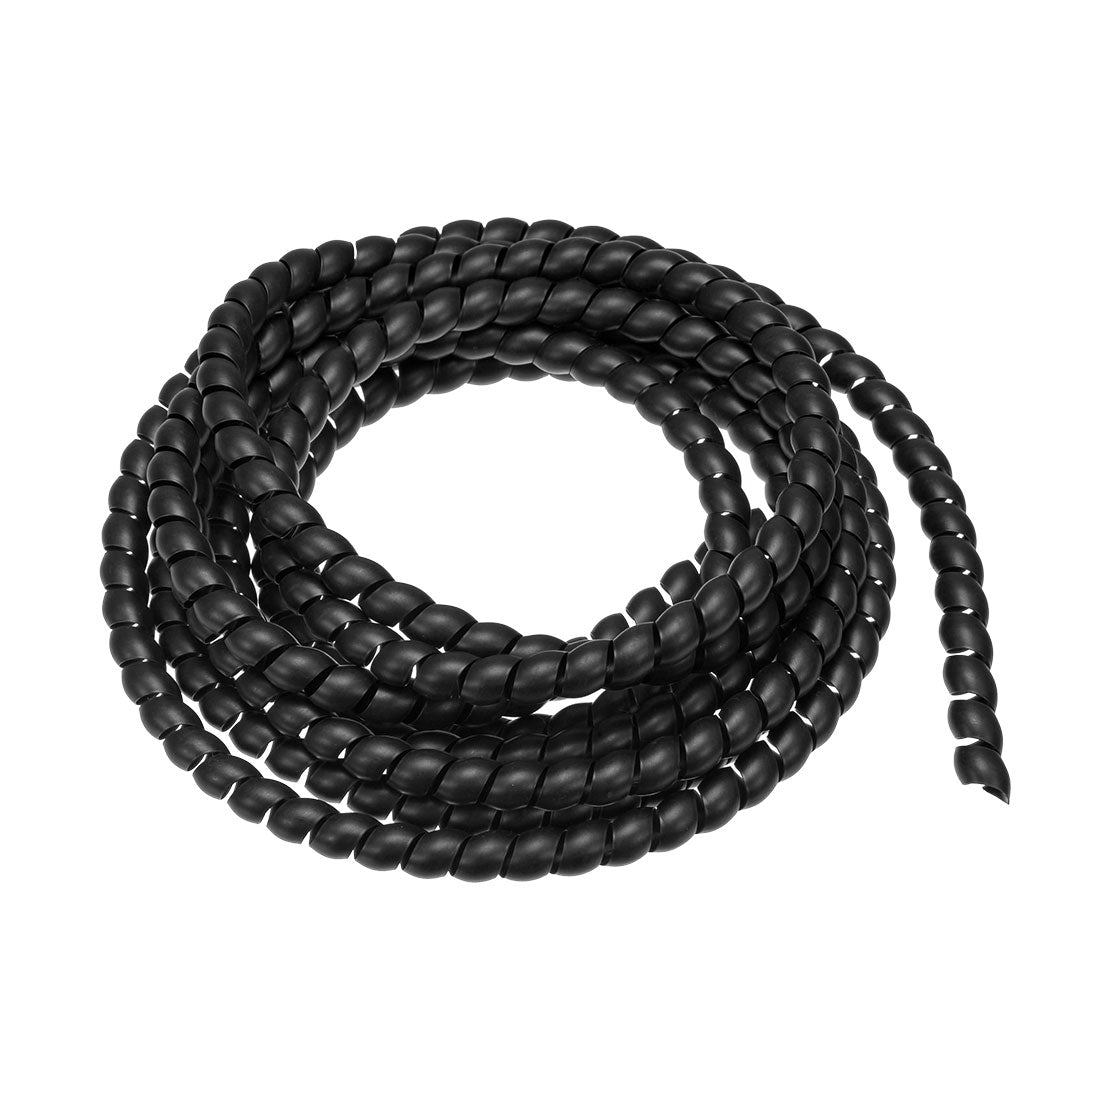 uxcell Uxcell Flexible Spiral Tube Wrap Cable Management Sleeve 10mm x 12mm Computer Wire Manage Cord 3 Meters Length Black